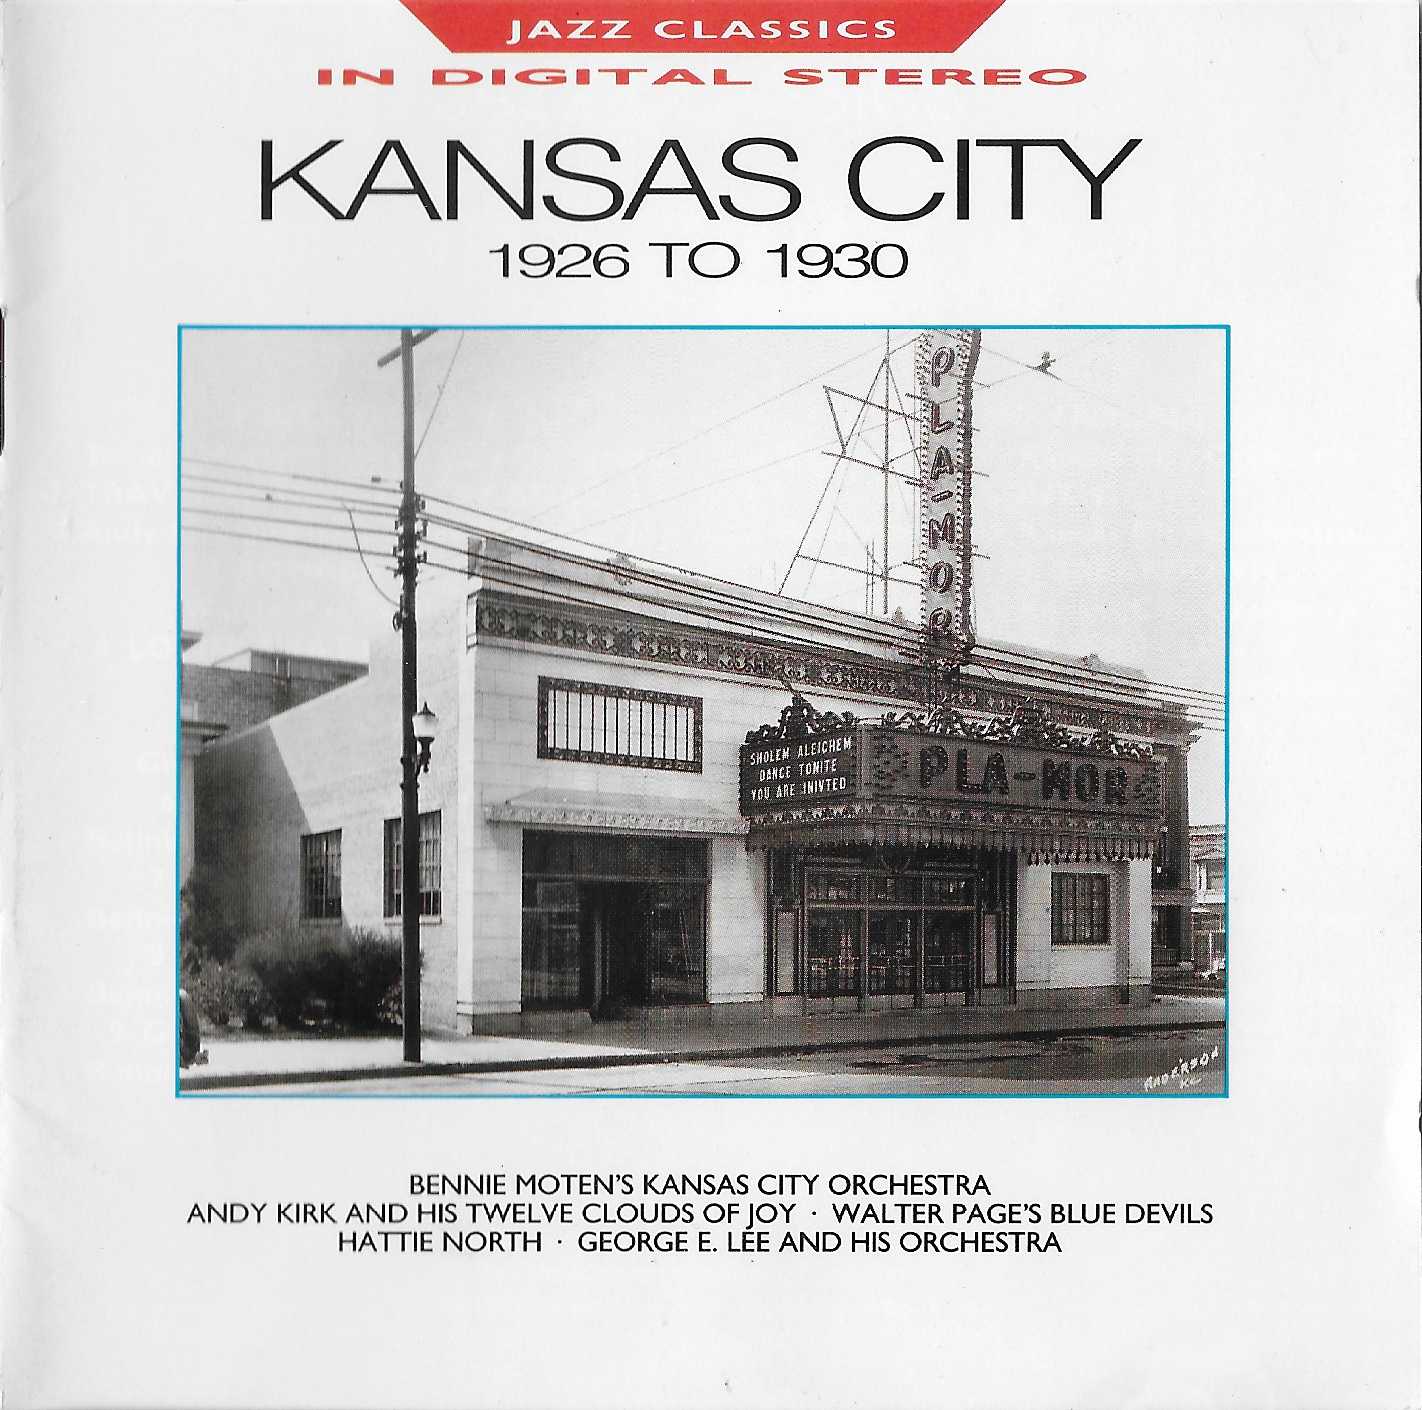 Picture of Jazz classics - Kansas City 1926 - 1930 by artist Various from the BBC cds - Records and Tapes library